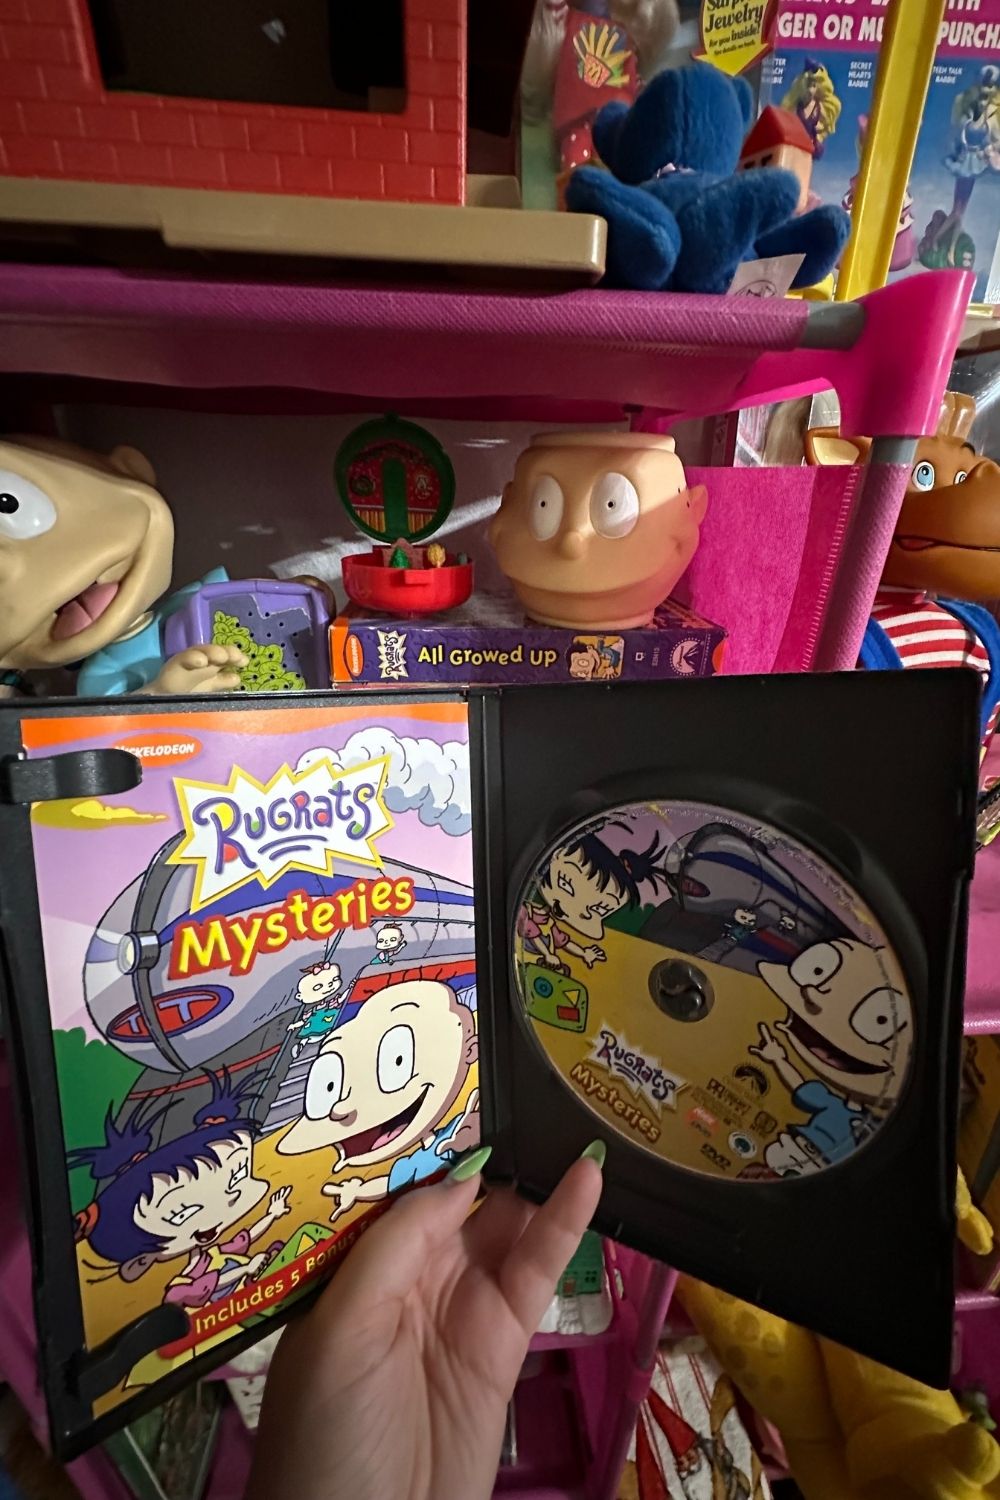 RUGRATS MYSTERIES 2003 DVD*